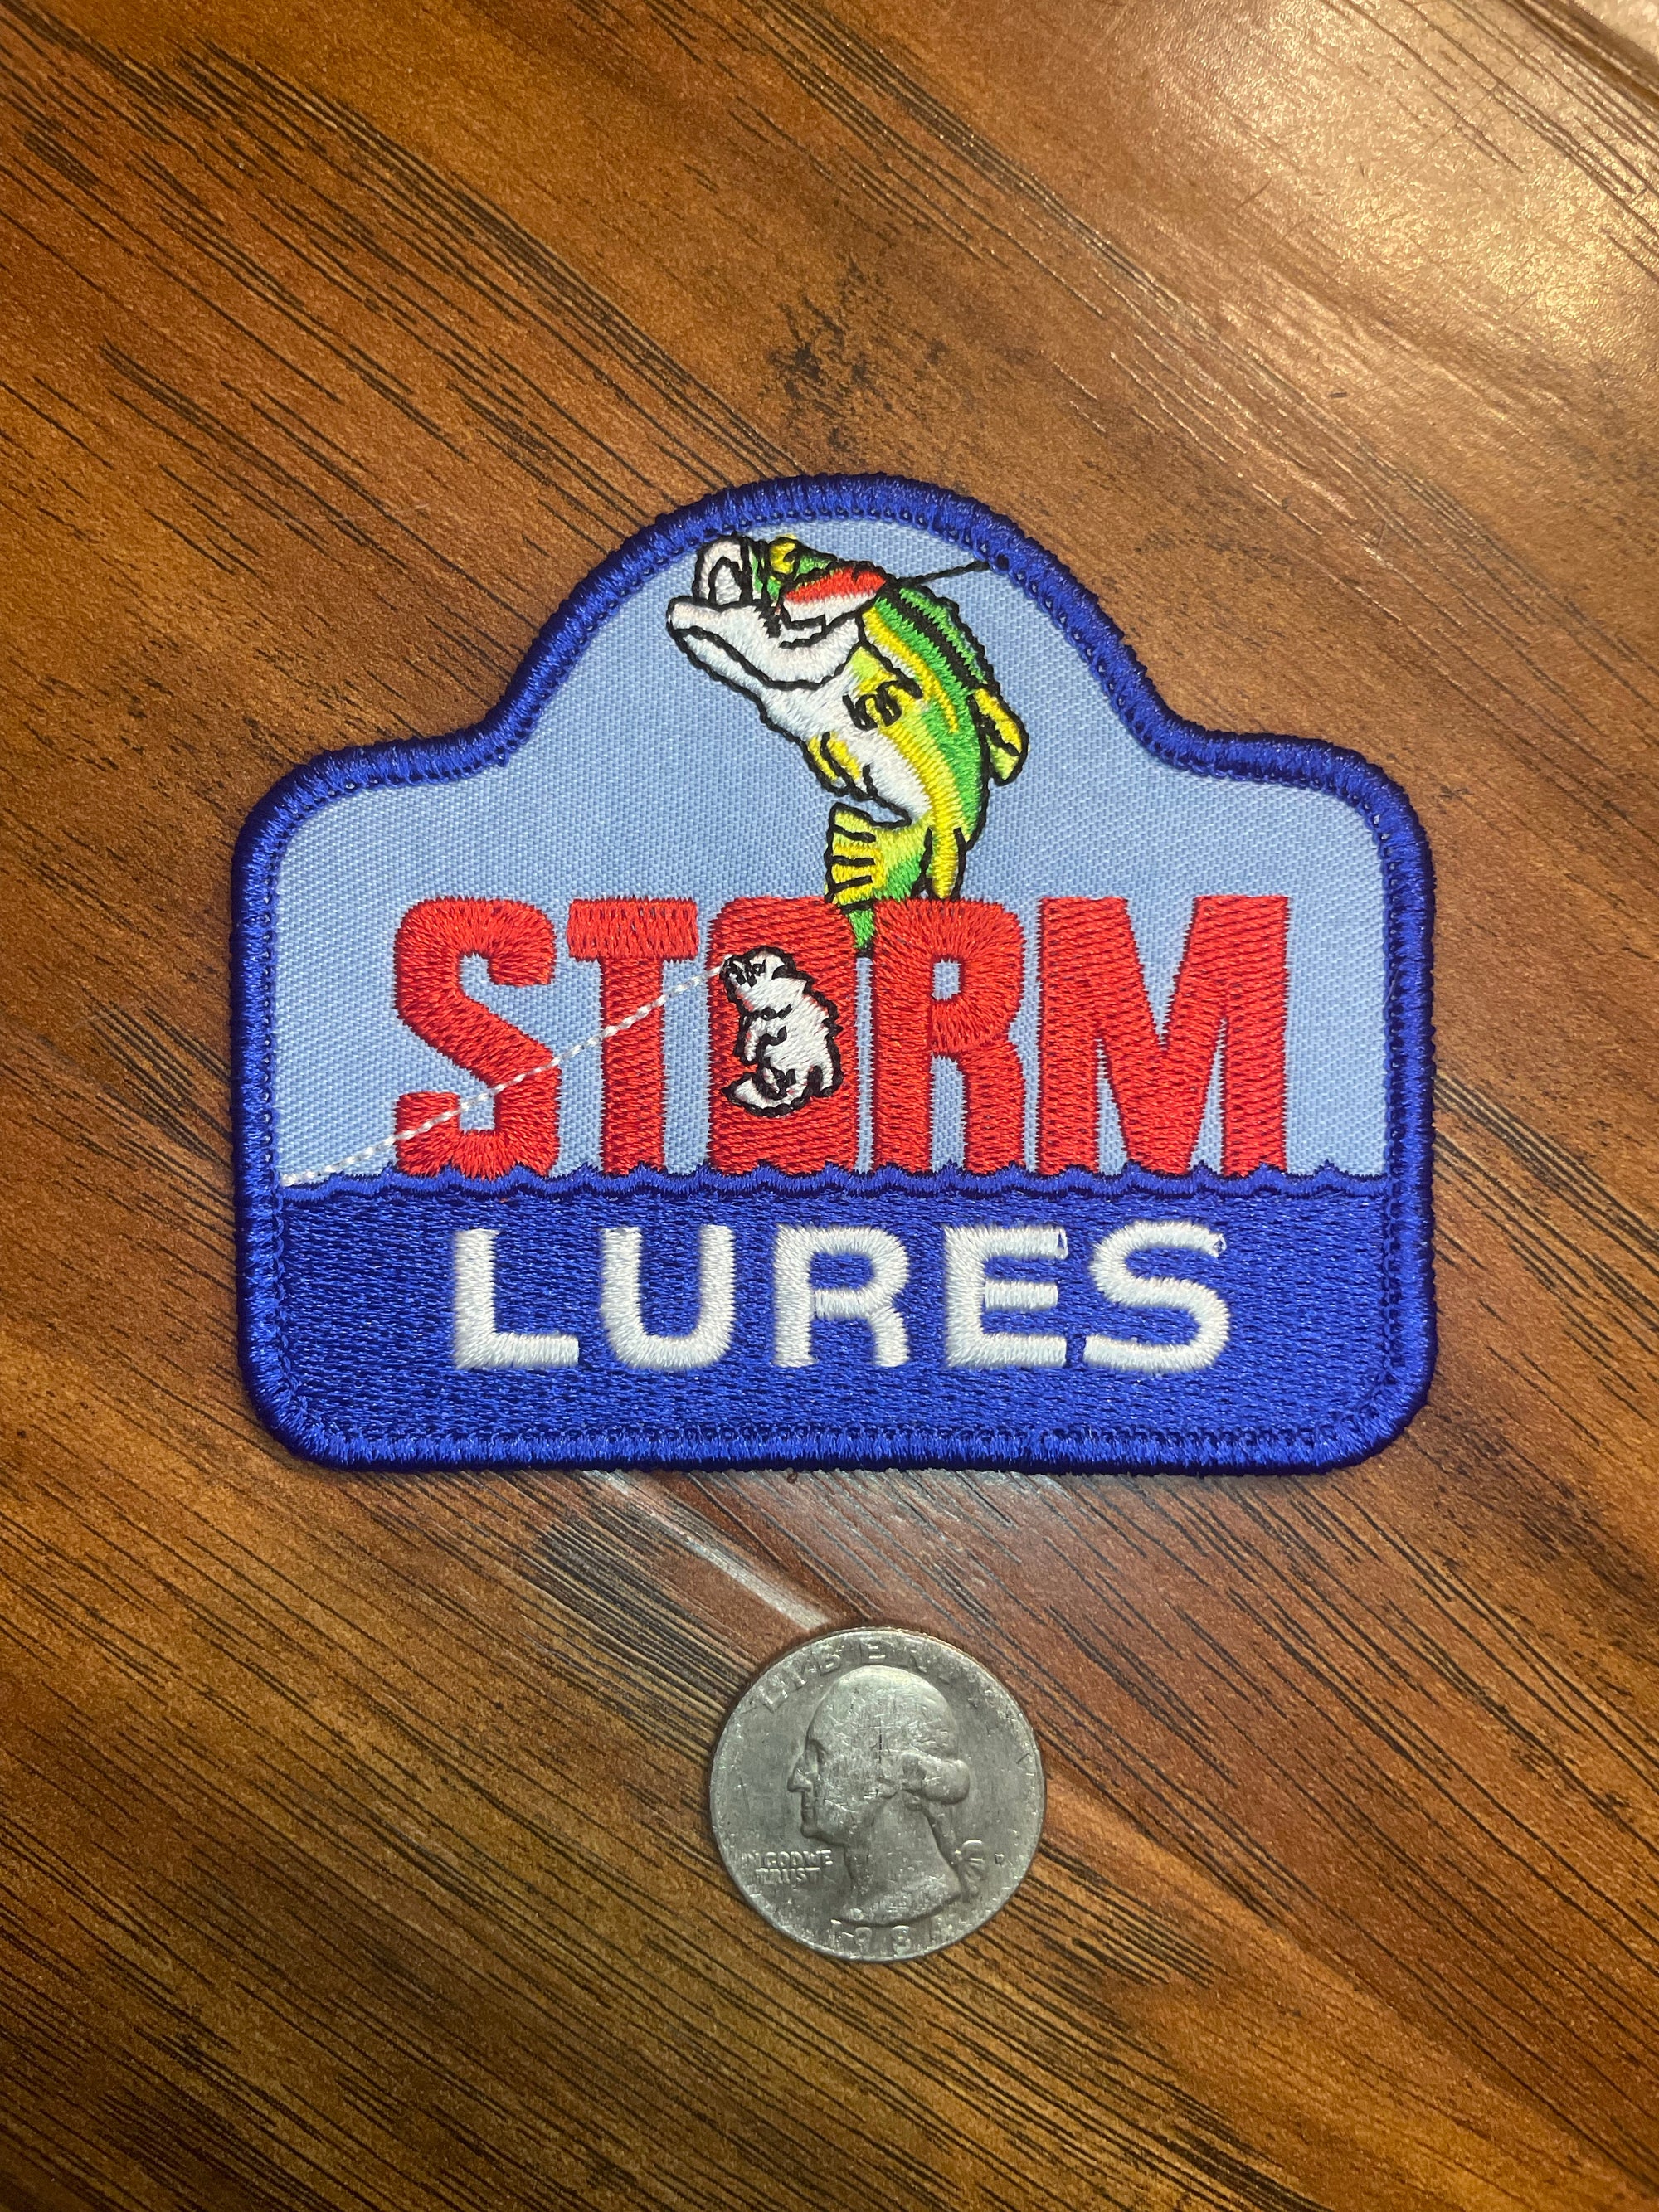 Storm Lures